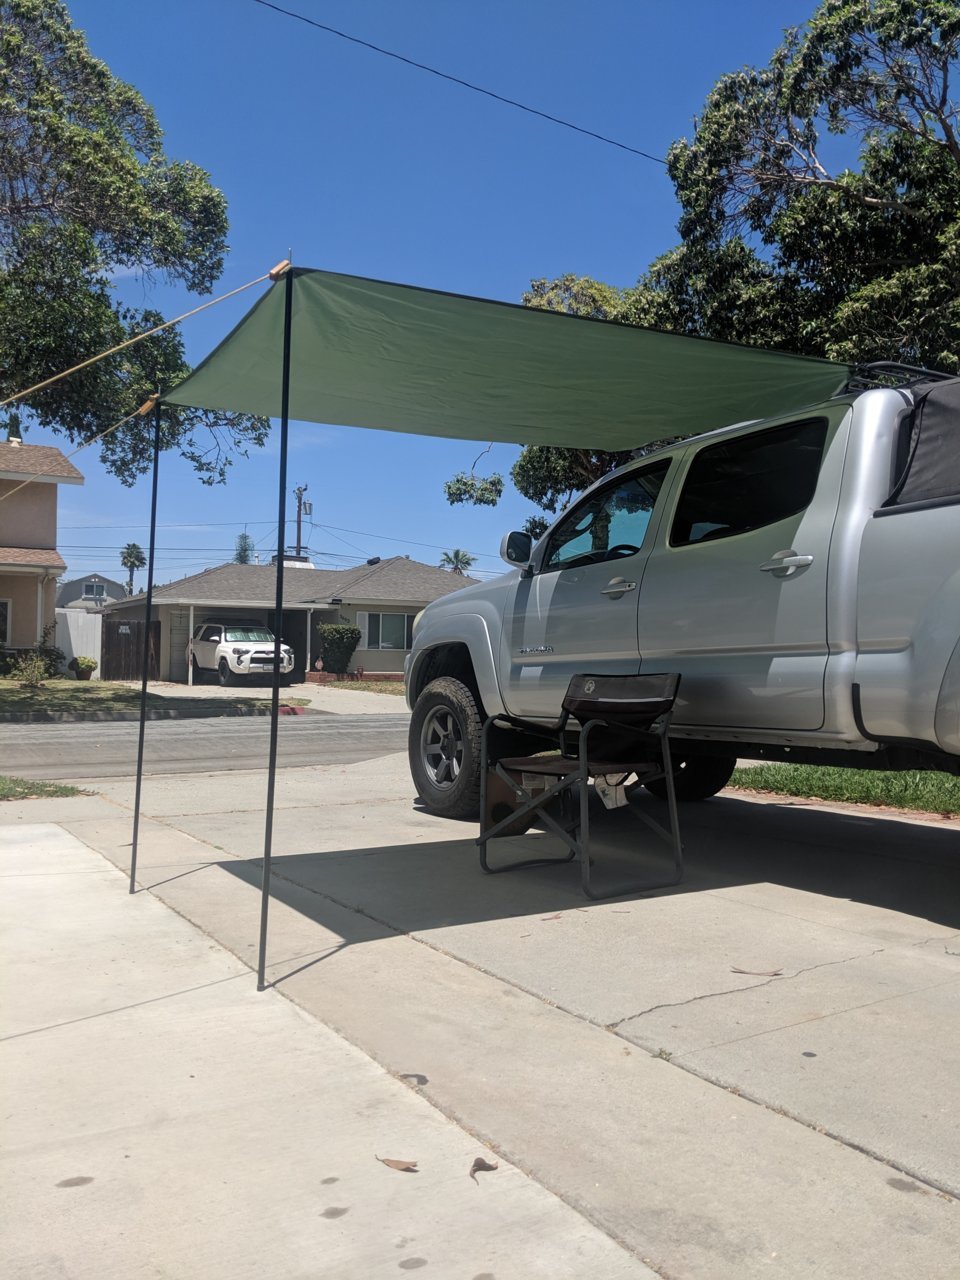 Show Me : DIY Truck Cap Awnings. | Page 2 | Tacoma World How To Store A Truck Cap Outside